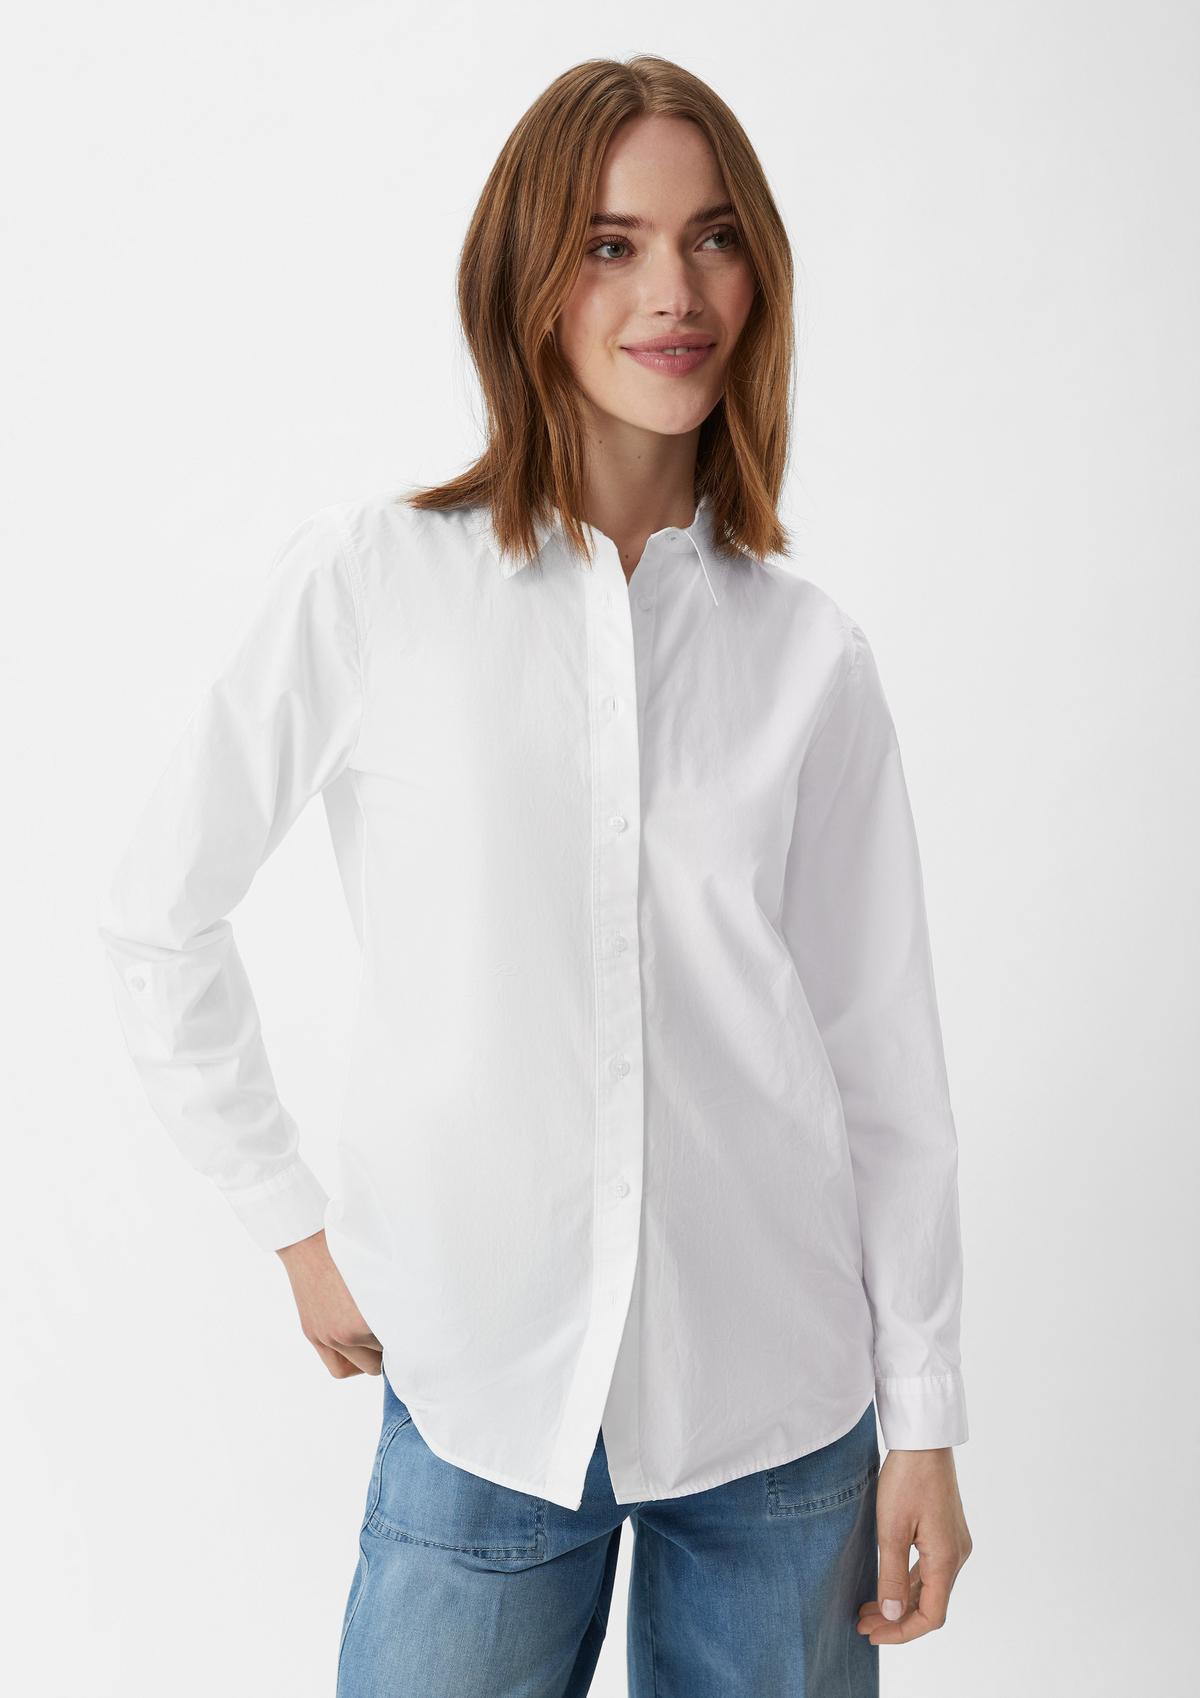 Shirt blouse with elongated back